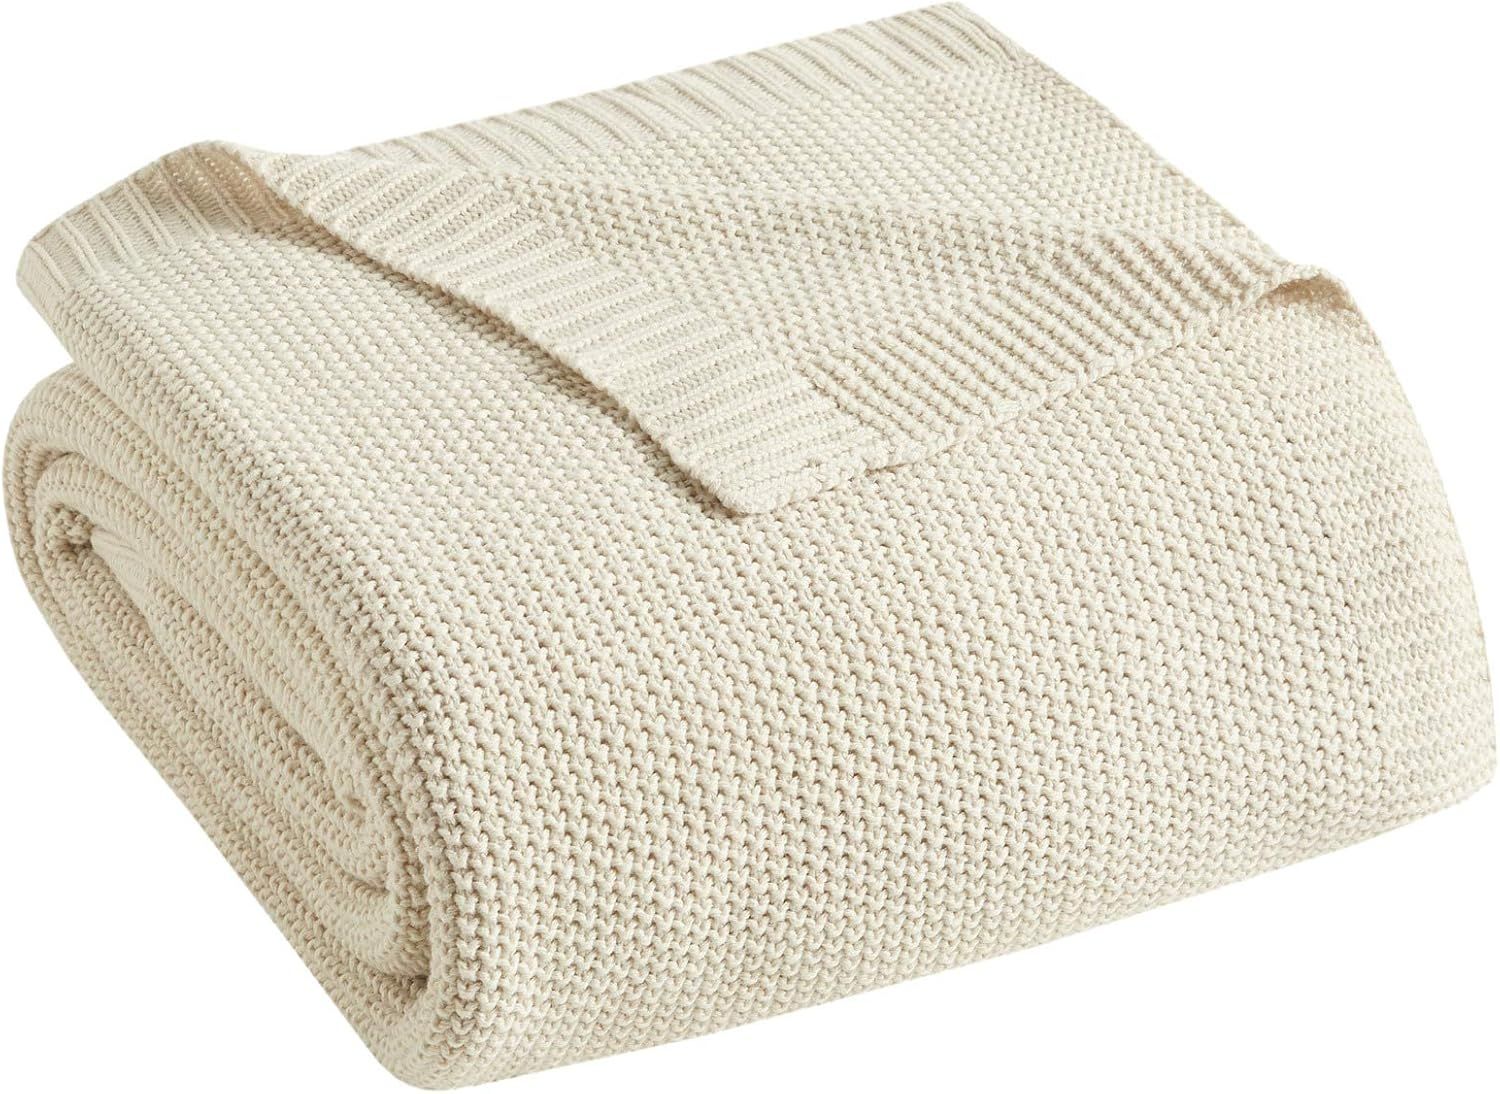 INK+IVY Bree Knit Luxury Knit Throw Ivory 50x60 Knit Premium Soft Cozy Acrylic For Bed, Couch or ... | Amazon (US)